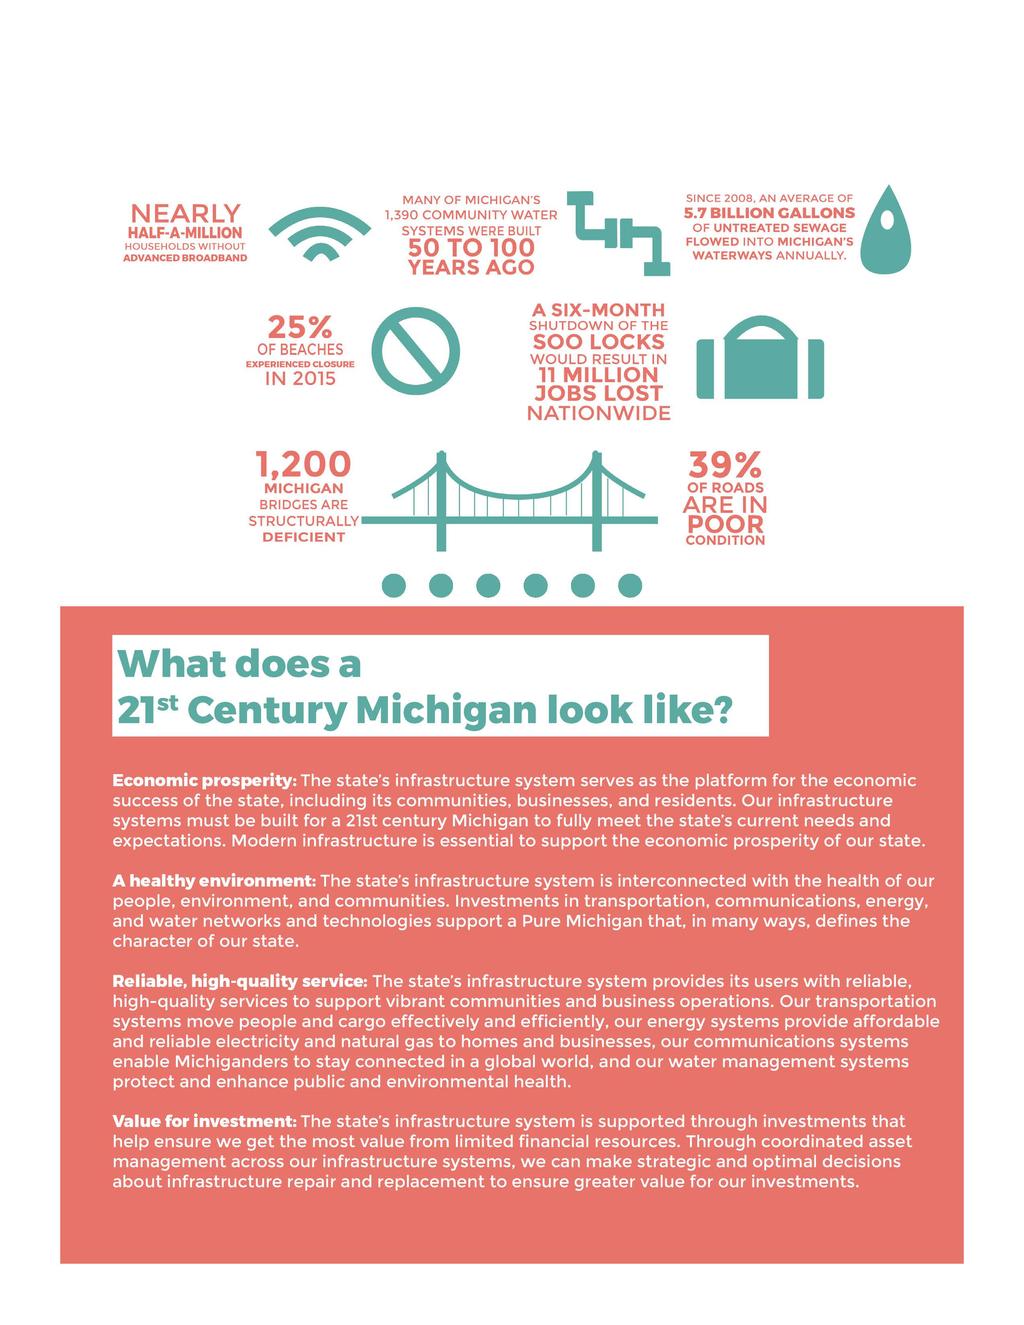 Where is Michigan Today? For more than half a century, we have not fully addressed the challenges facing our infrastructure systems.